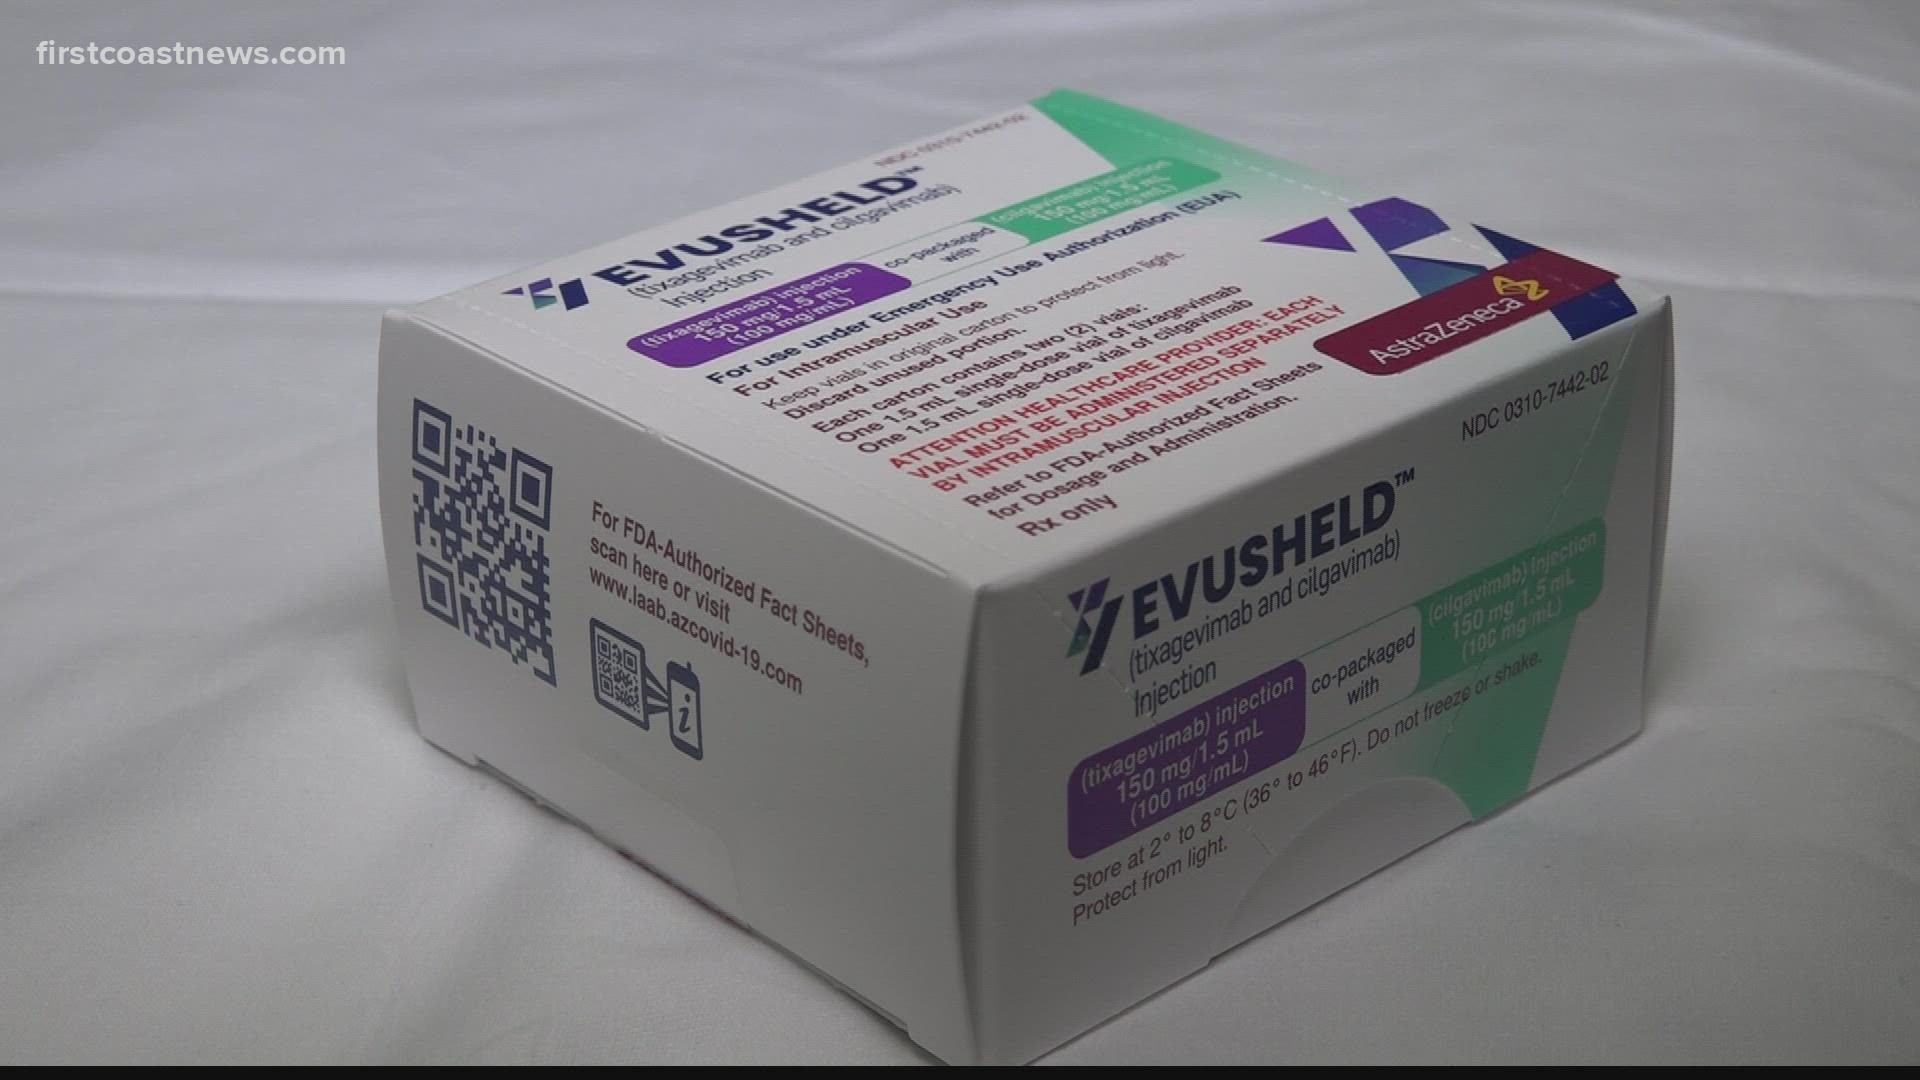 The new monoclonal antibody treatment by drug company AstraZeneca is called Evusheld and is available at Crucial Care on Baymeadows Road.